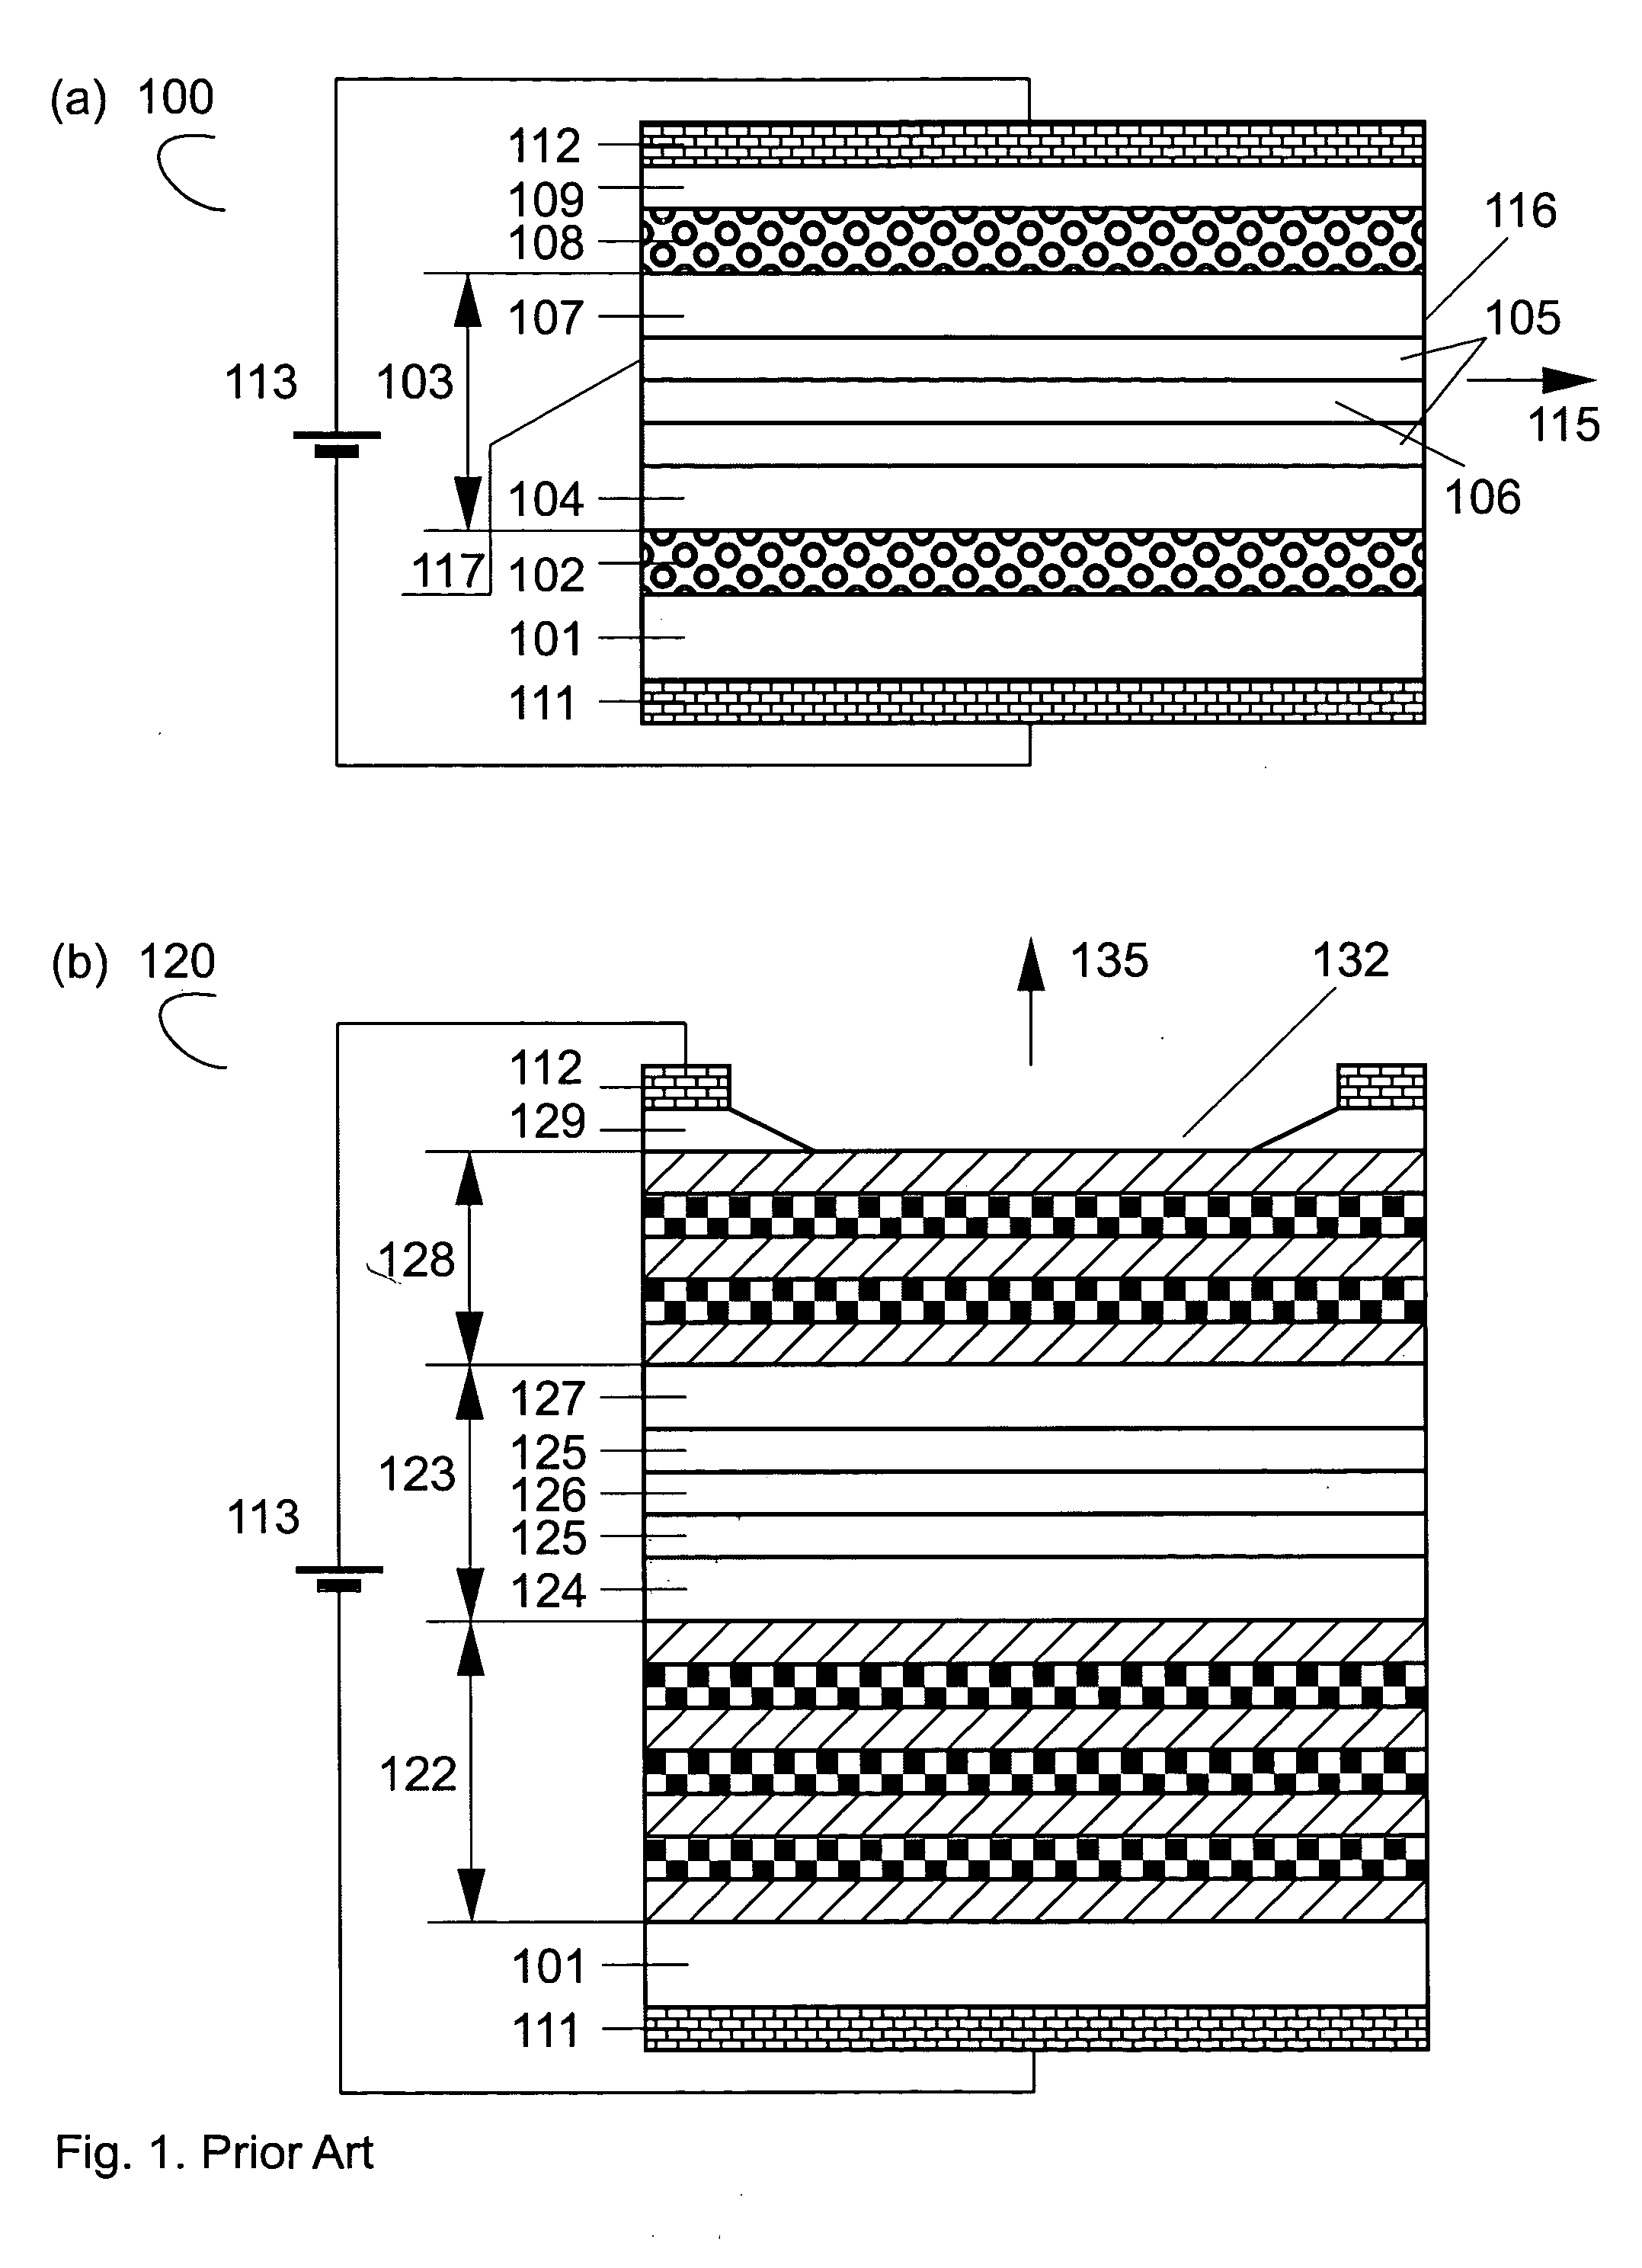 Tilted cavity semiconductor optoelectronic device and method of making same